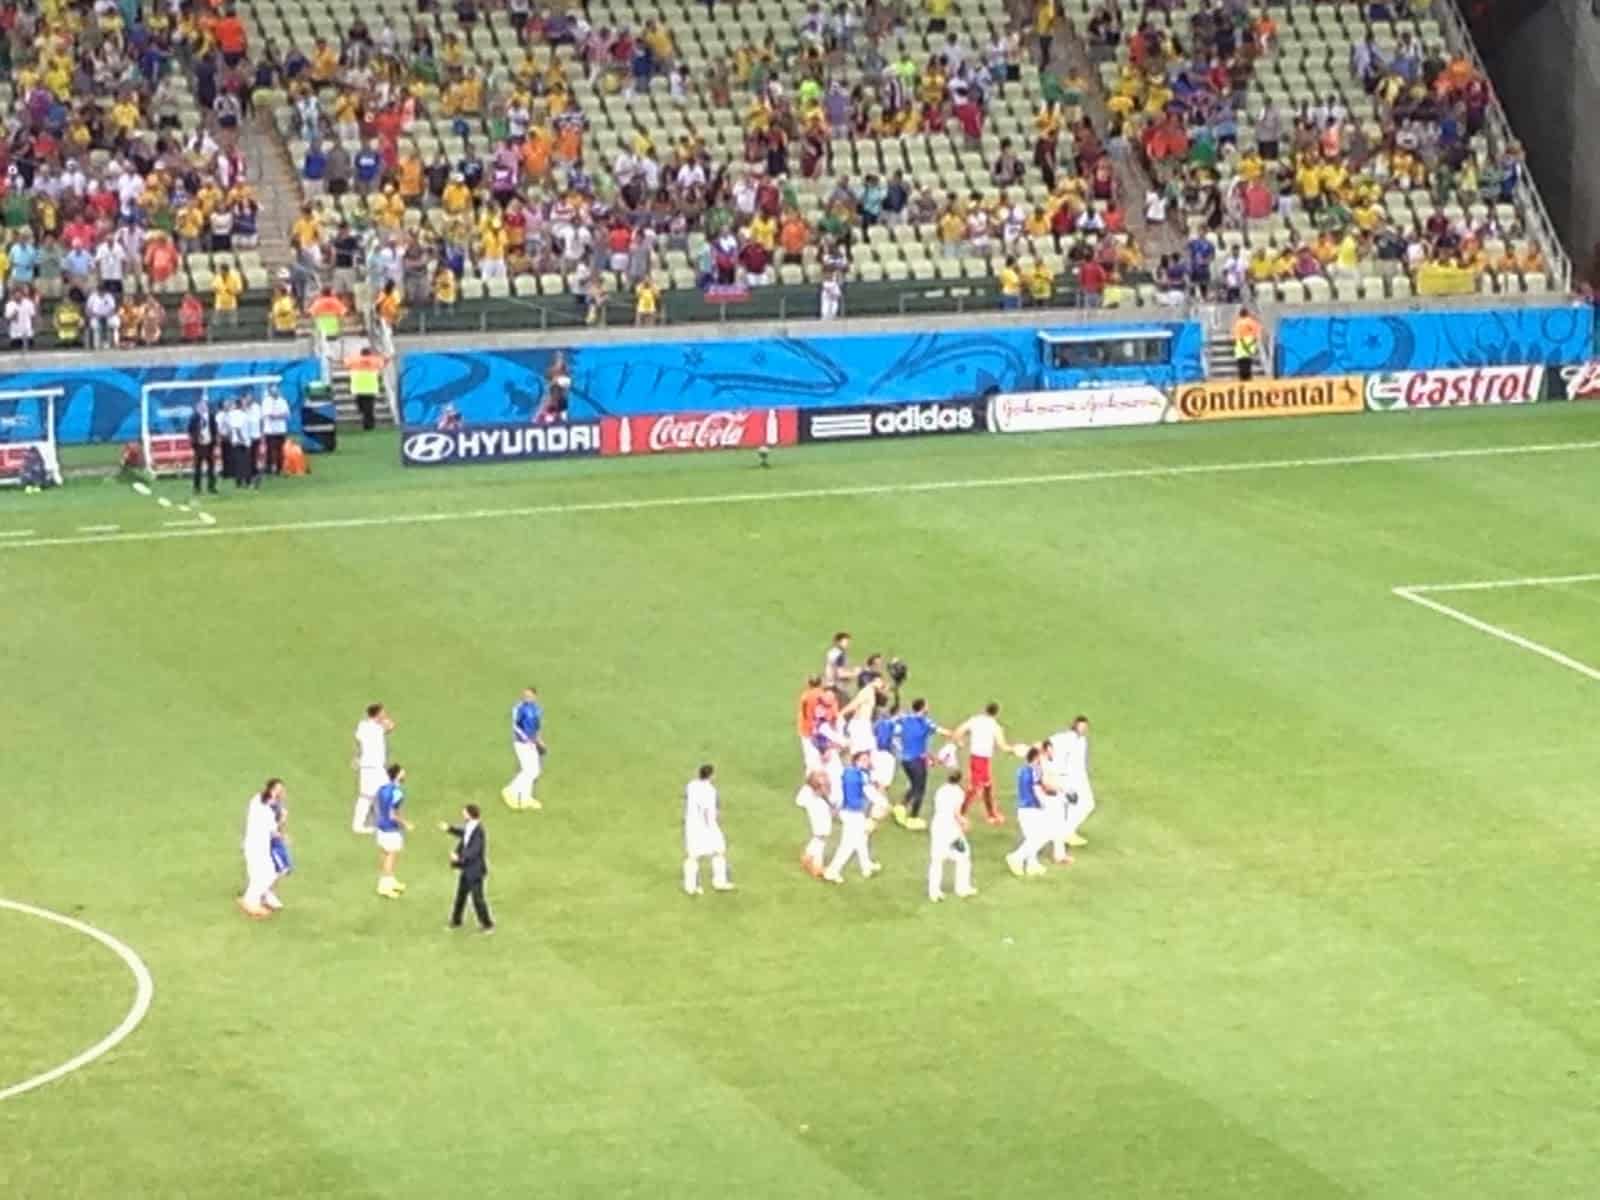 Greece celebrating their win in the 2014 World Cup at Arena Castelão in Fortaleza, Brazil